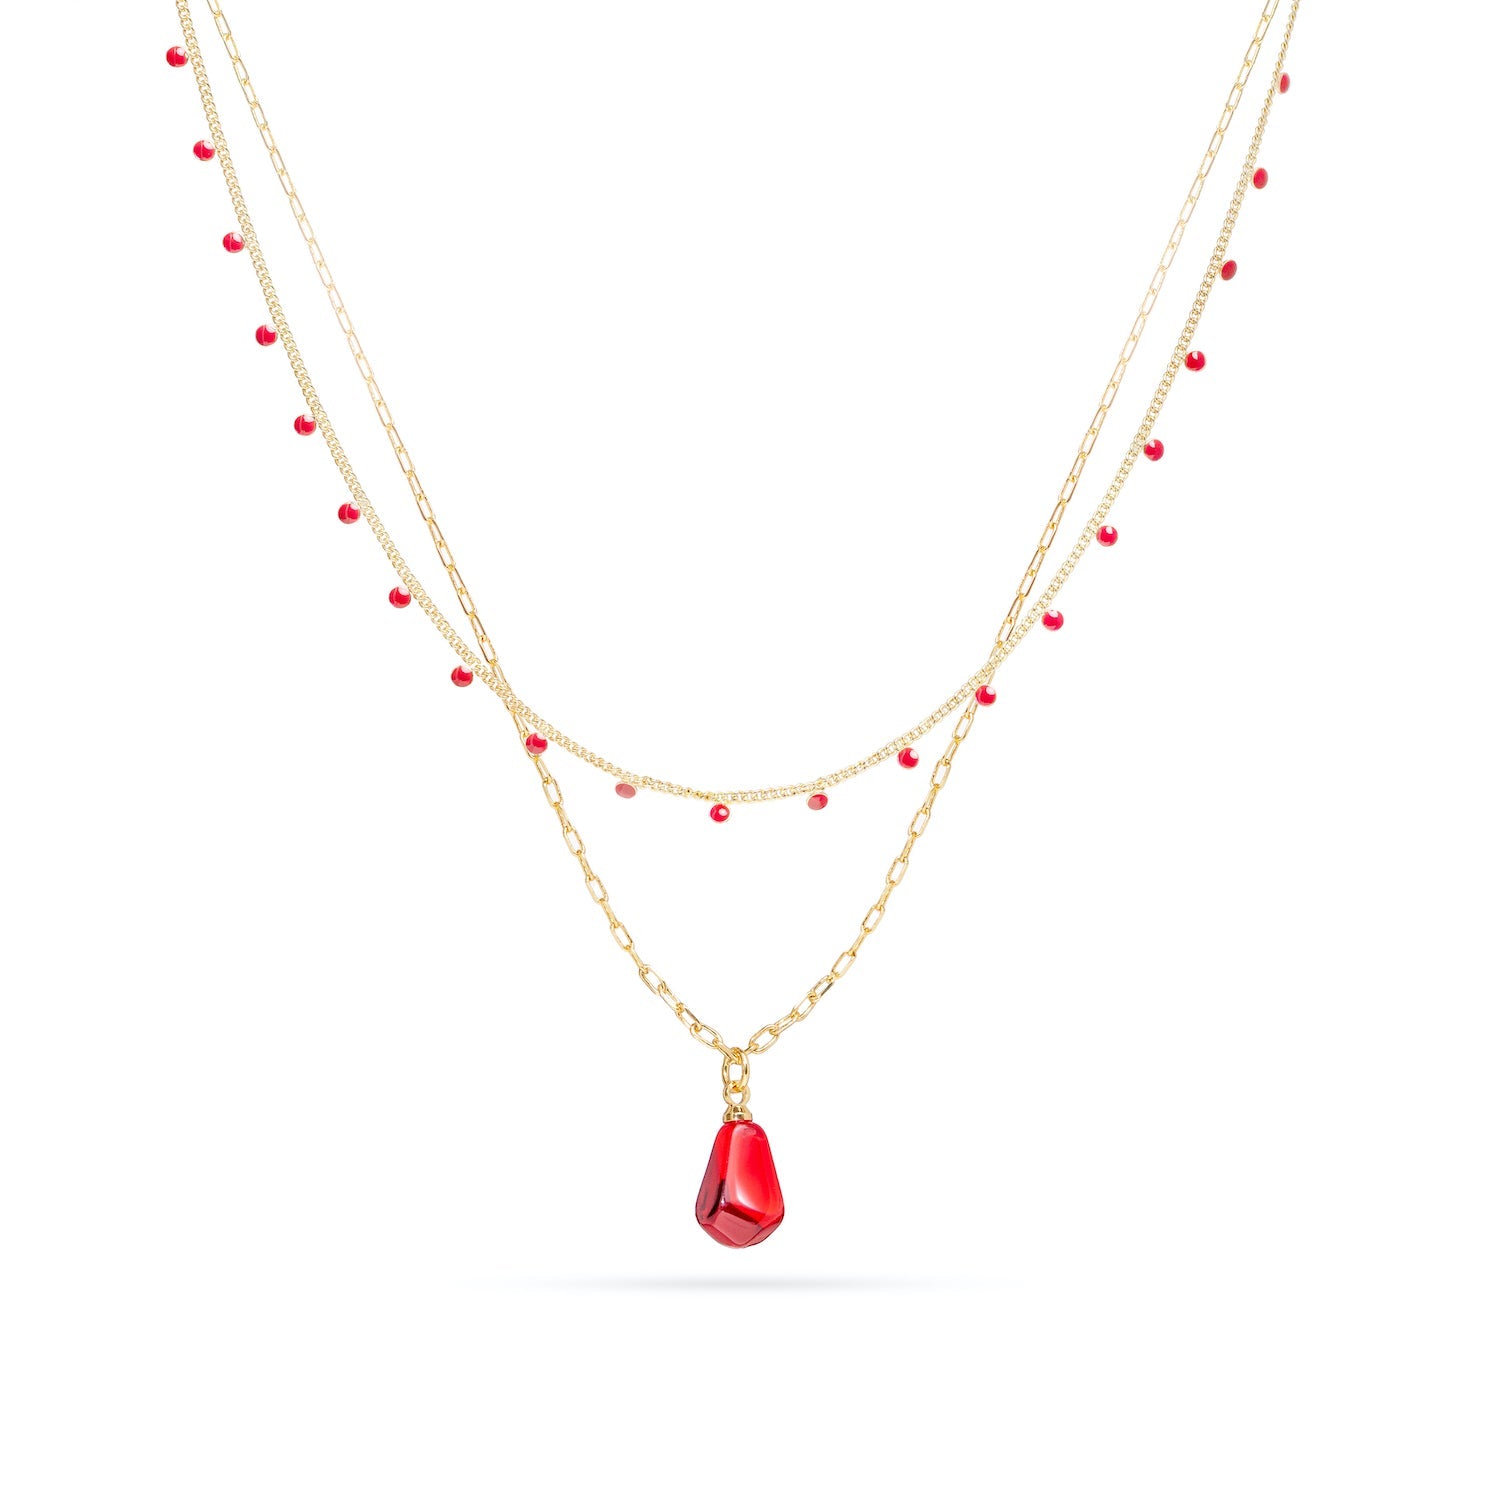 Armenian Pomegranate Seed Necklace - Fertility & Abundance Symbolized
Length: 16" & 18", 14K gold plated, double necklace with brass casting and Formica pom seeds. Discover the seed of life! Bijou Her